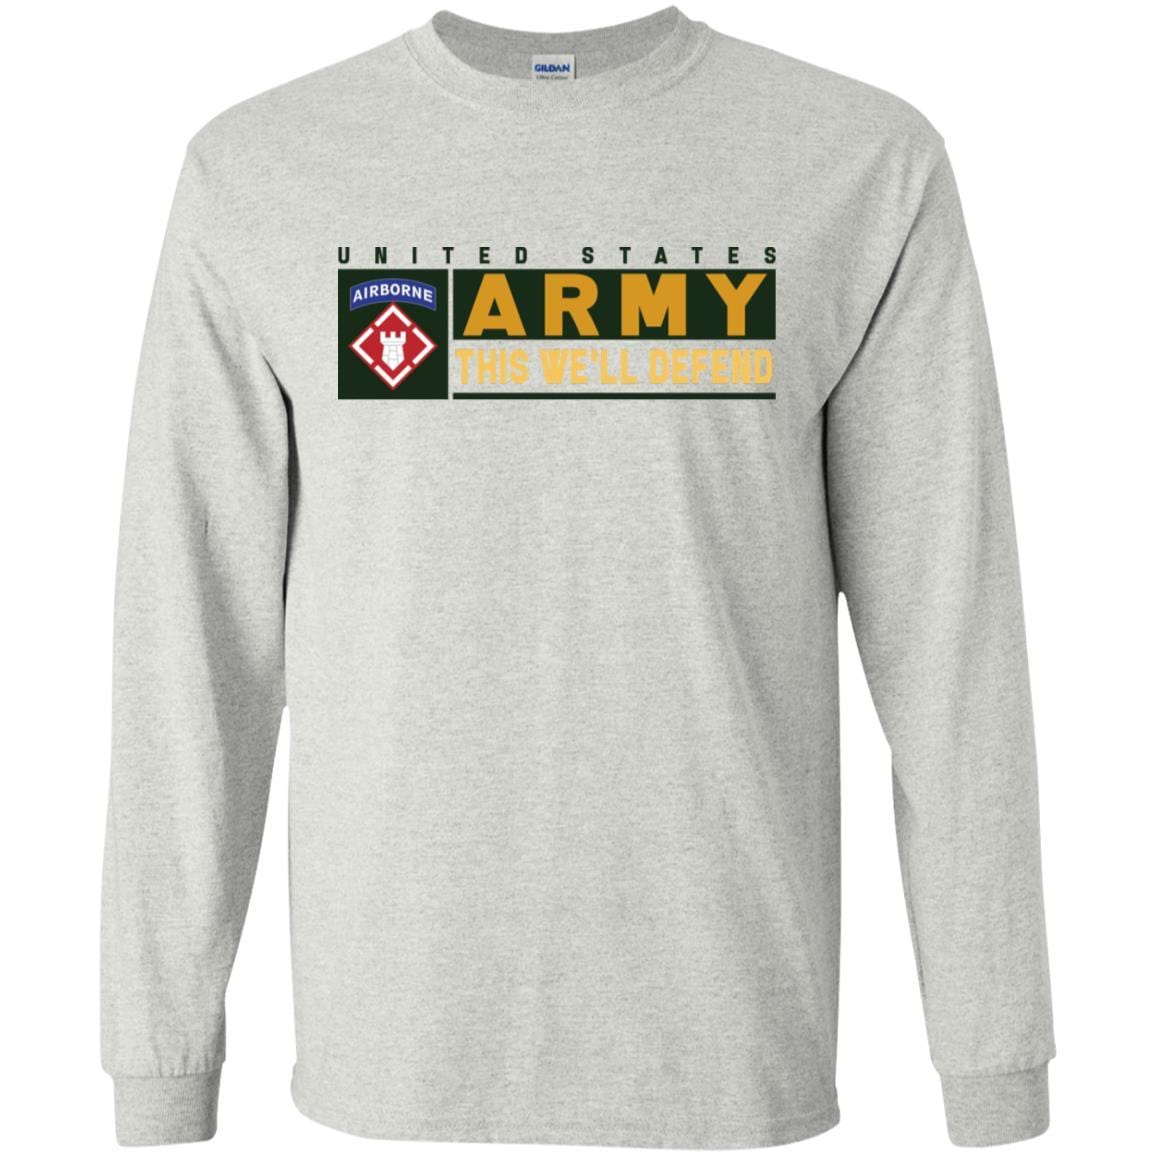 US Army 20TH ENGINEER BRIGADE WITH AIRBORNE TAB- This We'll Defend T-Shirt On Front For Men-TShirt-Army-Veterans Nation